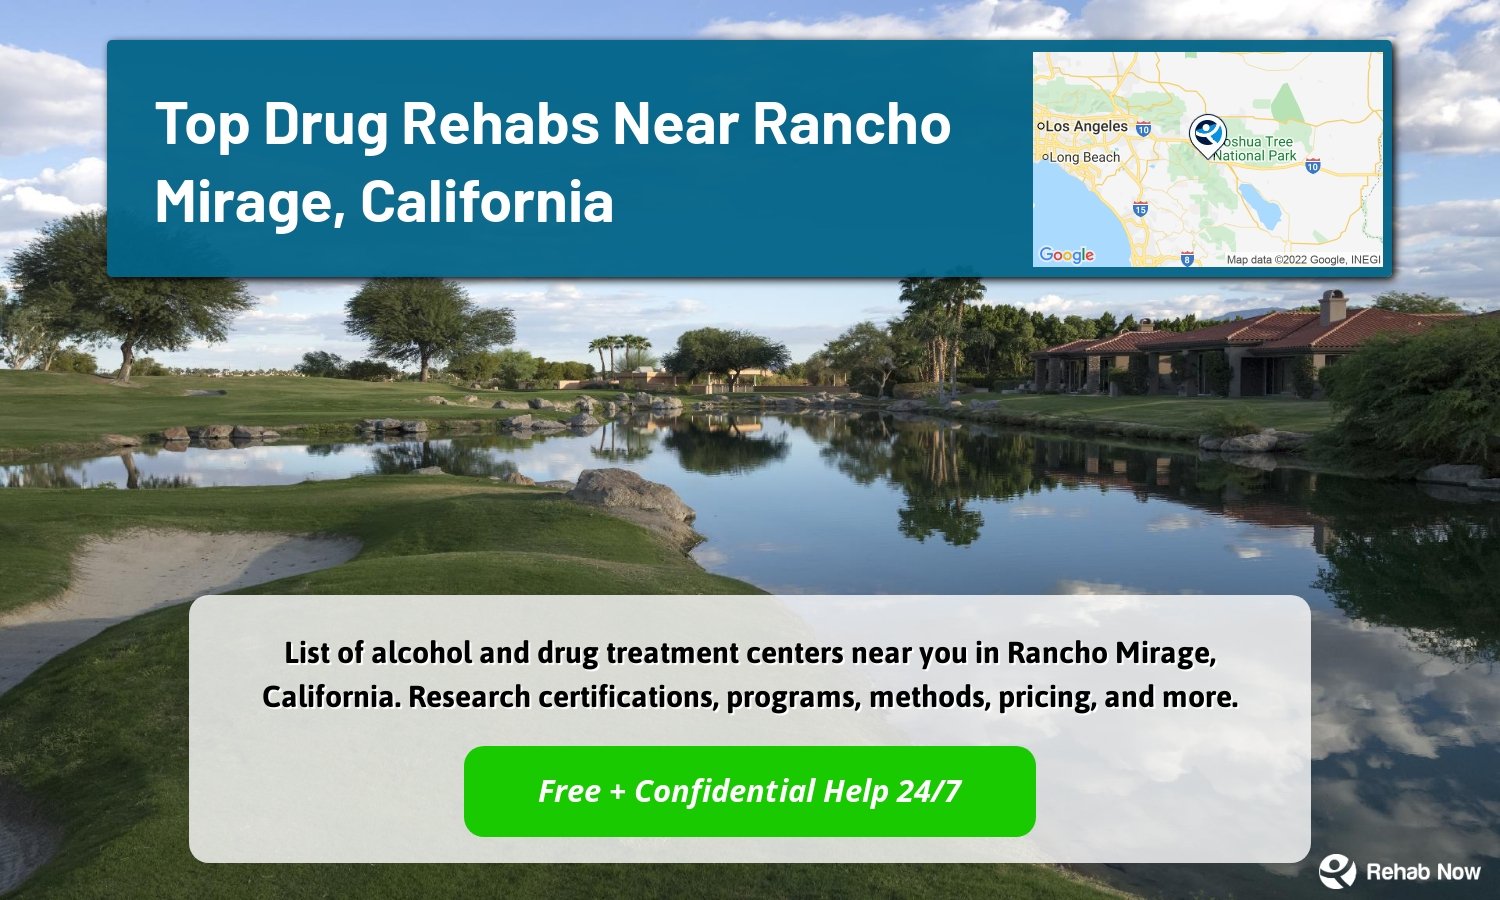 List of alcohol and drug treatment centers near you in Rancho Mirage, California. Research certifications, programs, methods, pricing, and more.